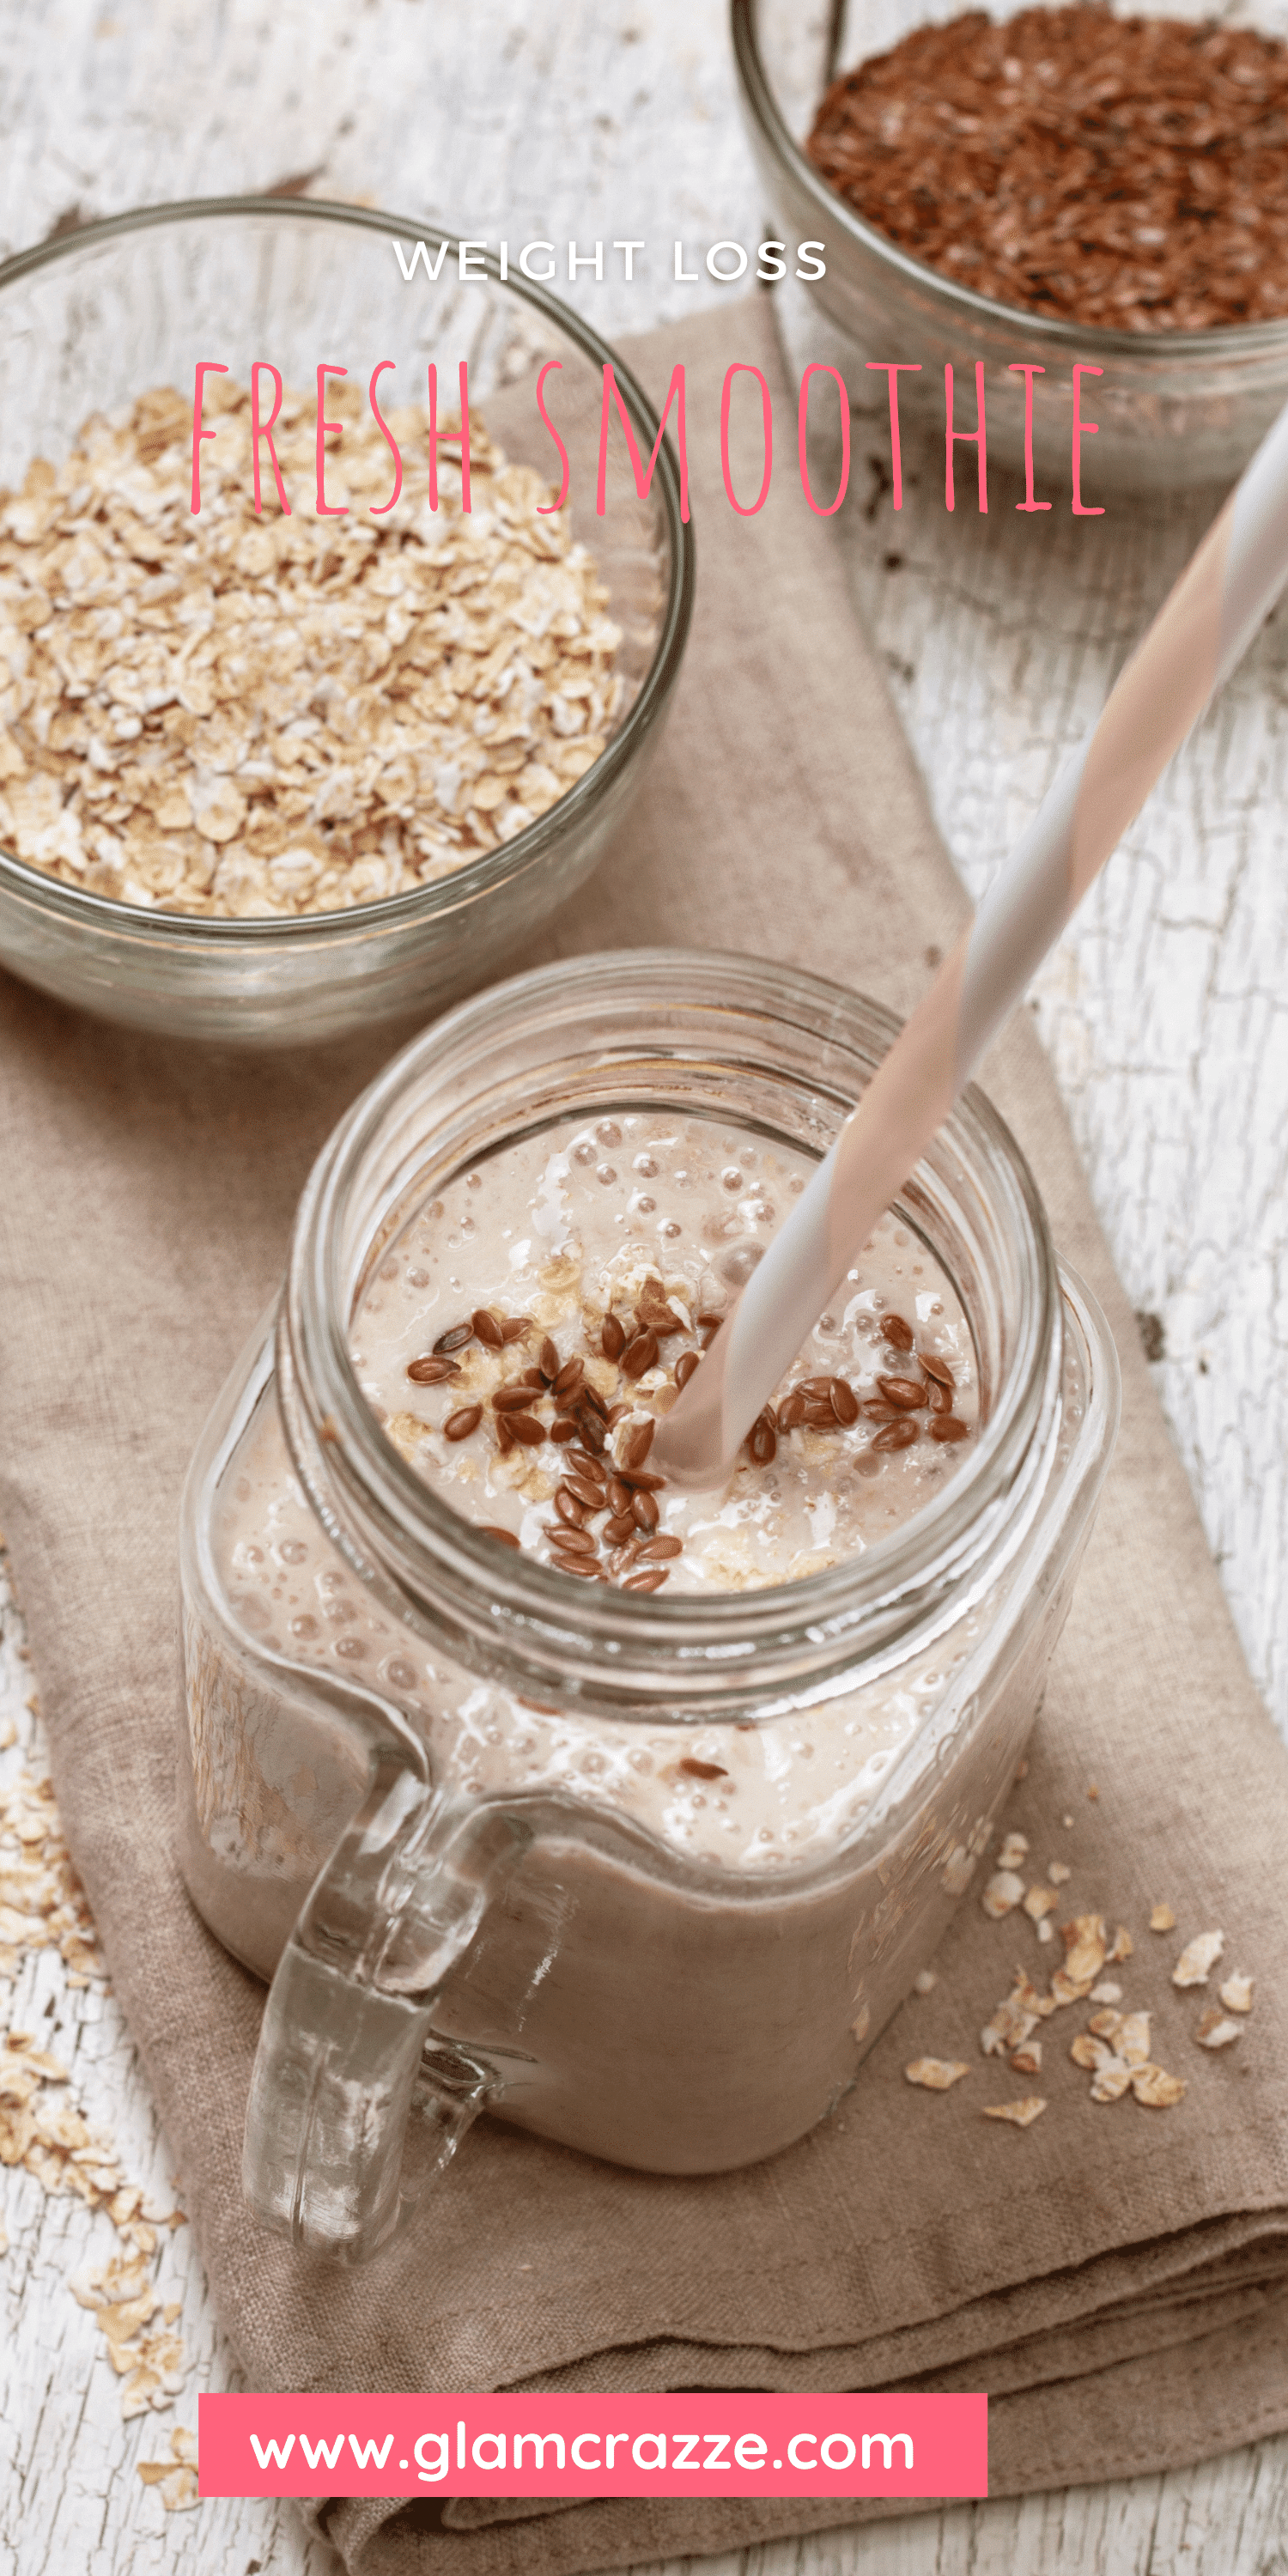 Oatmeal Weight loss smoothie recipes